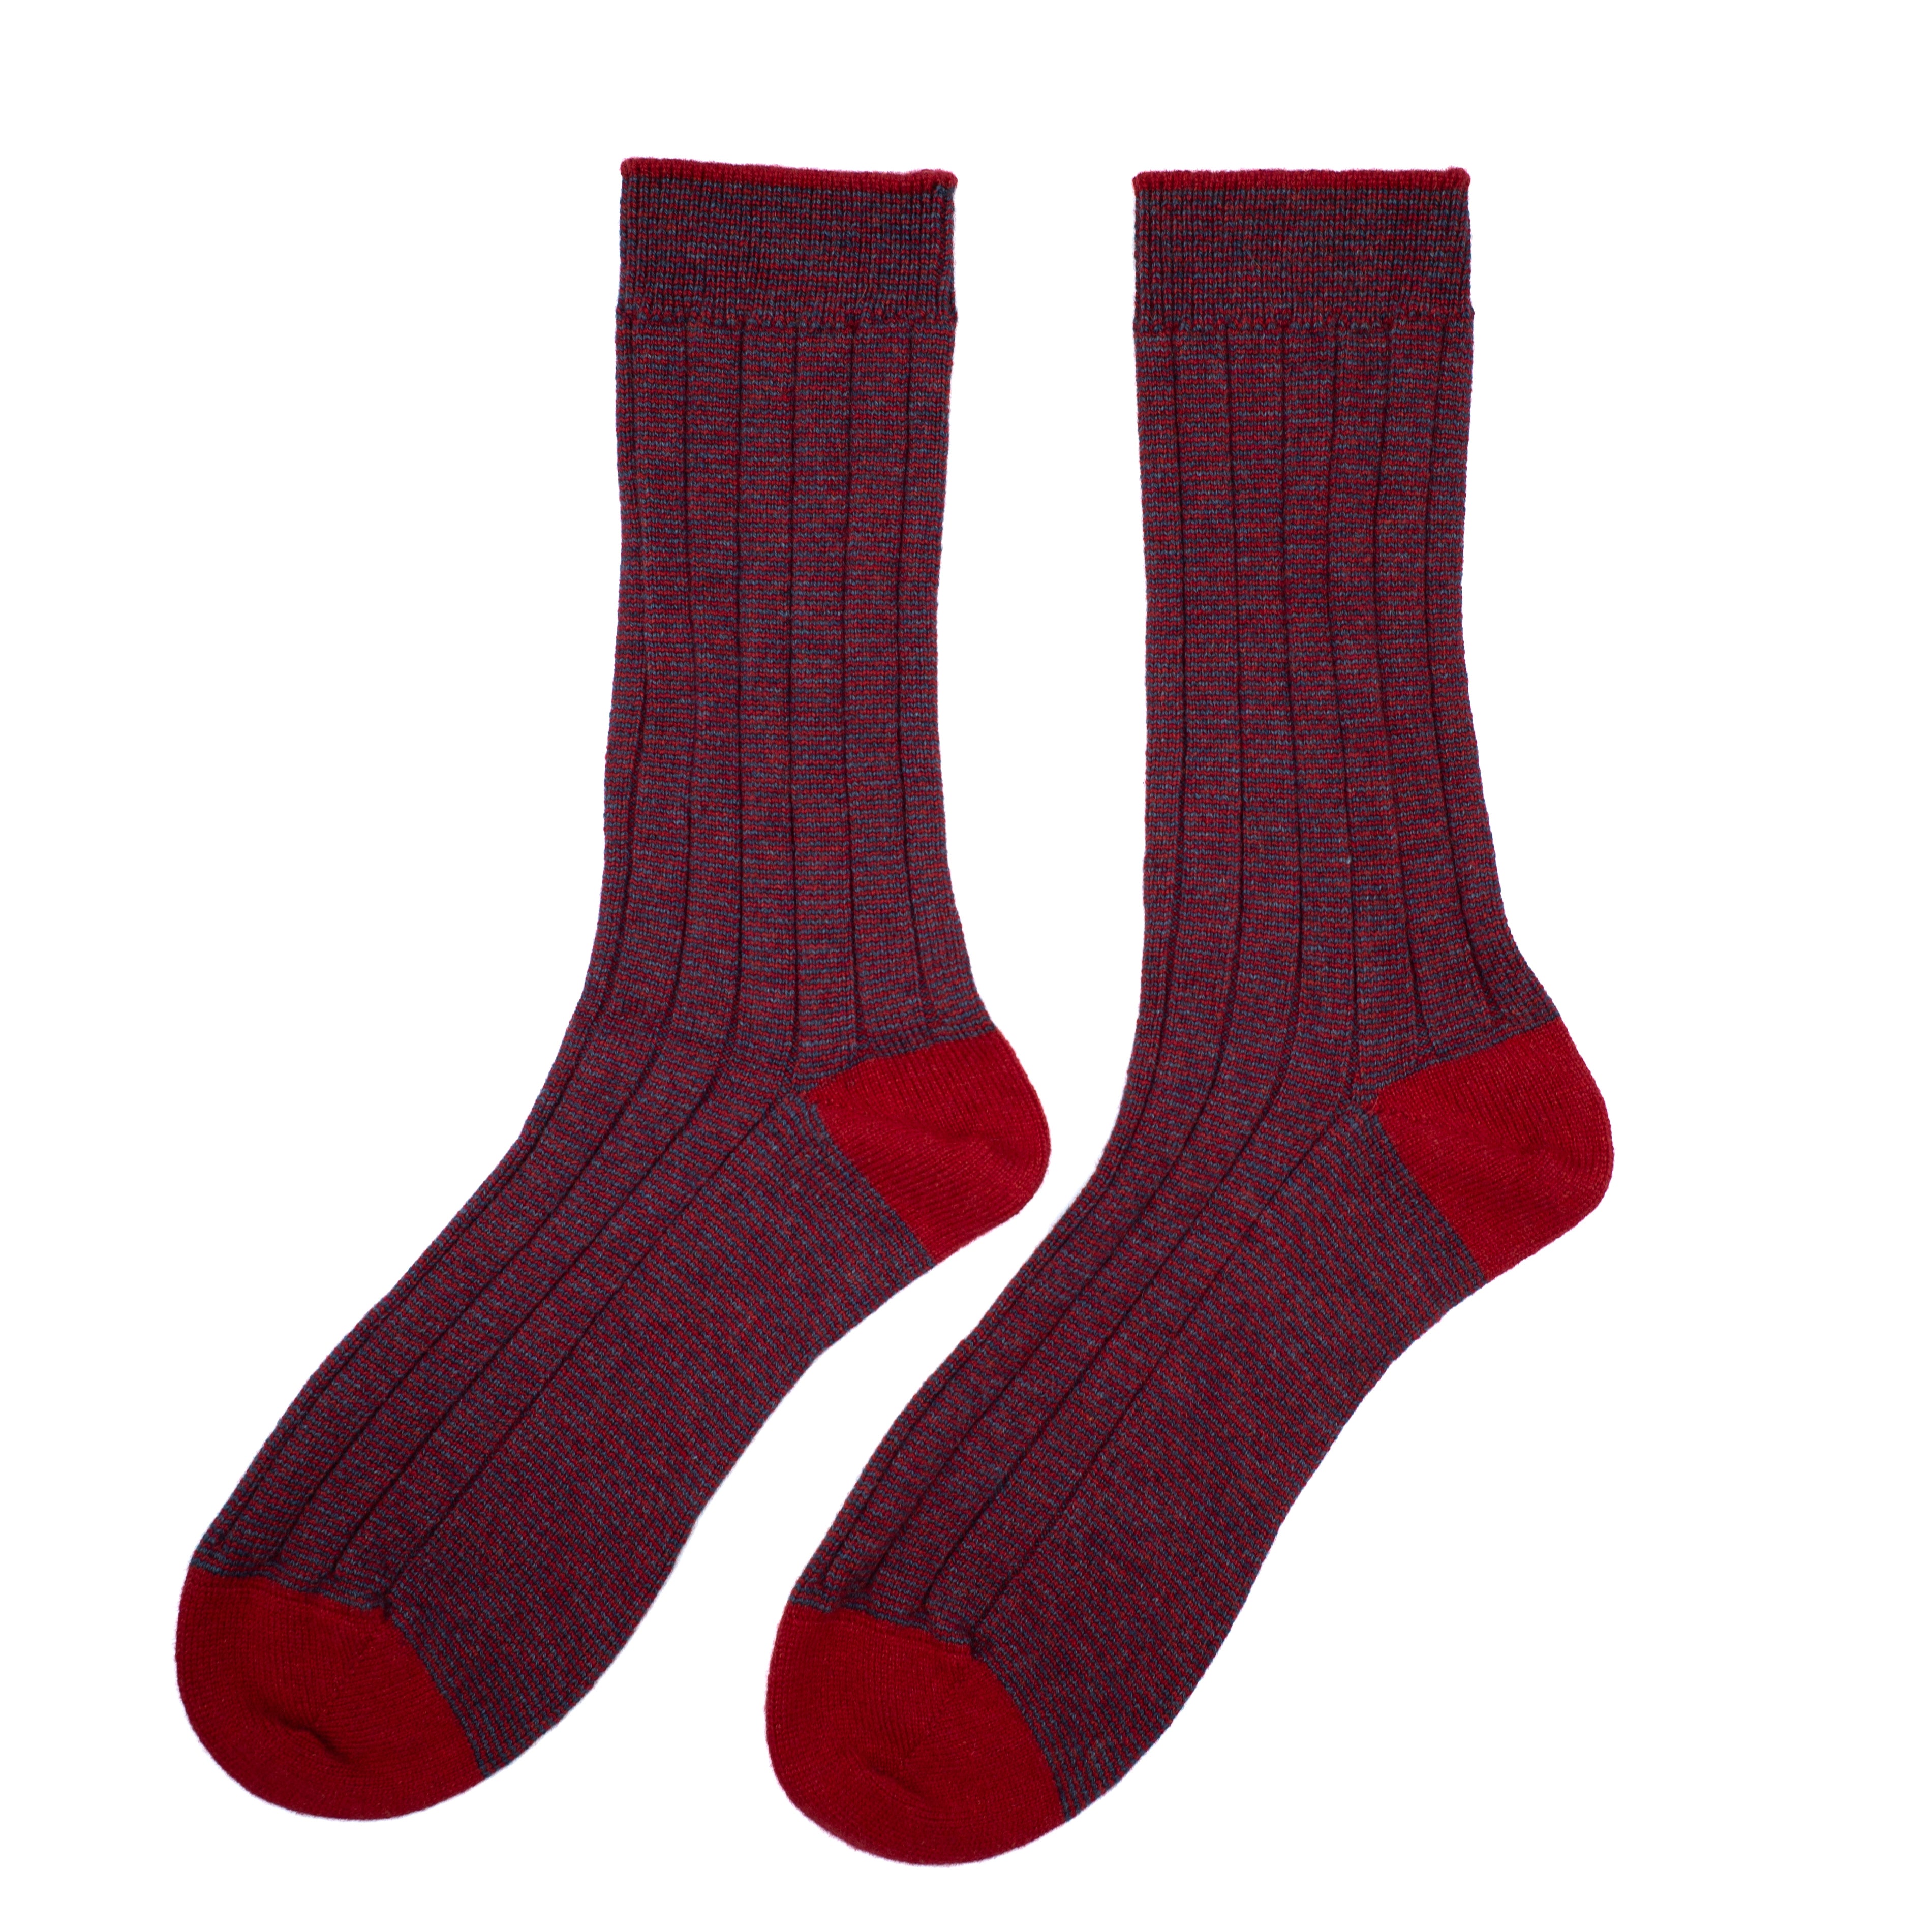 Men’s New Scottish Red Cashmere Every Day Socks